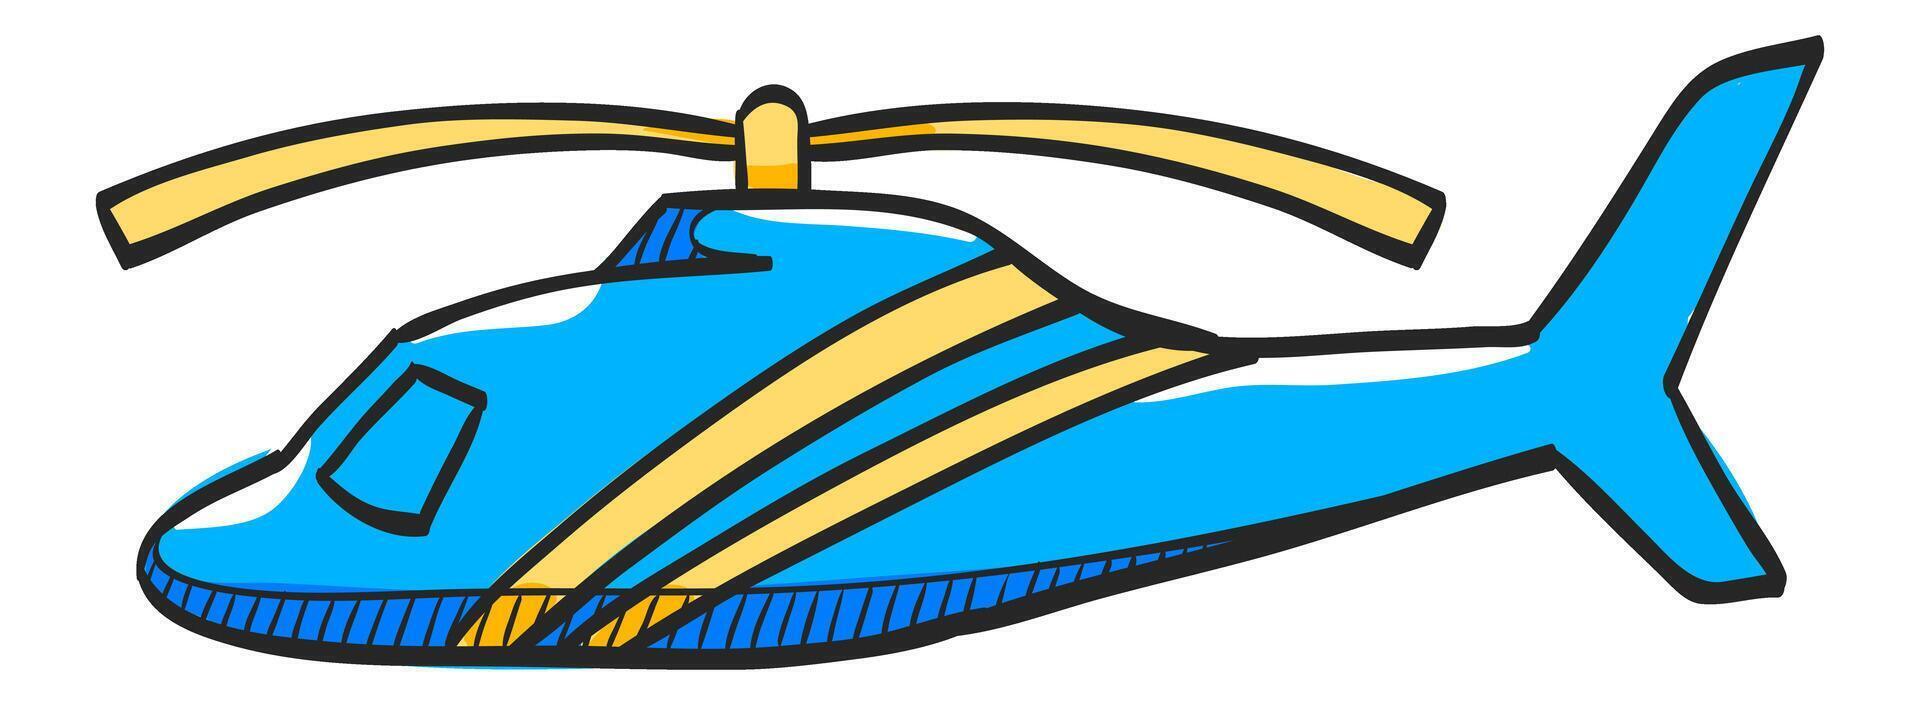 Helicopter icon in hand drawn color vector illustration